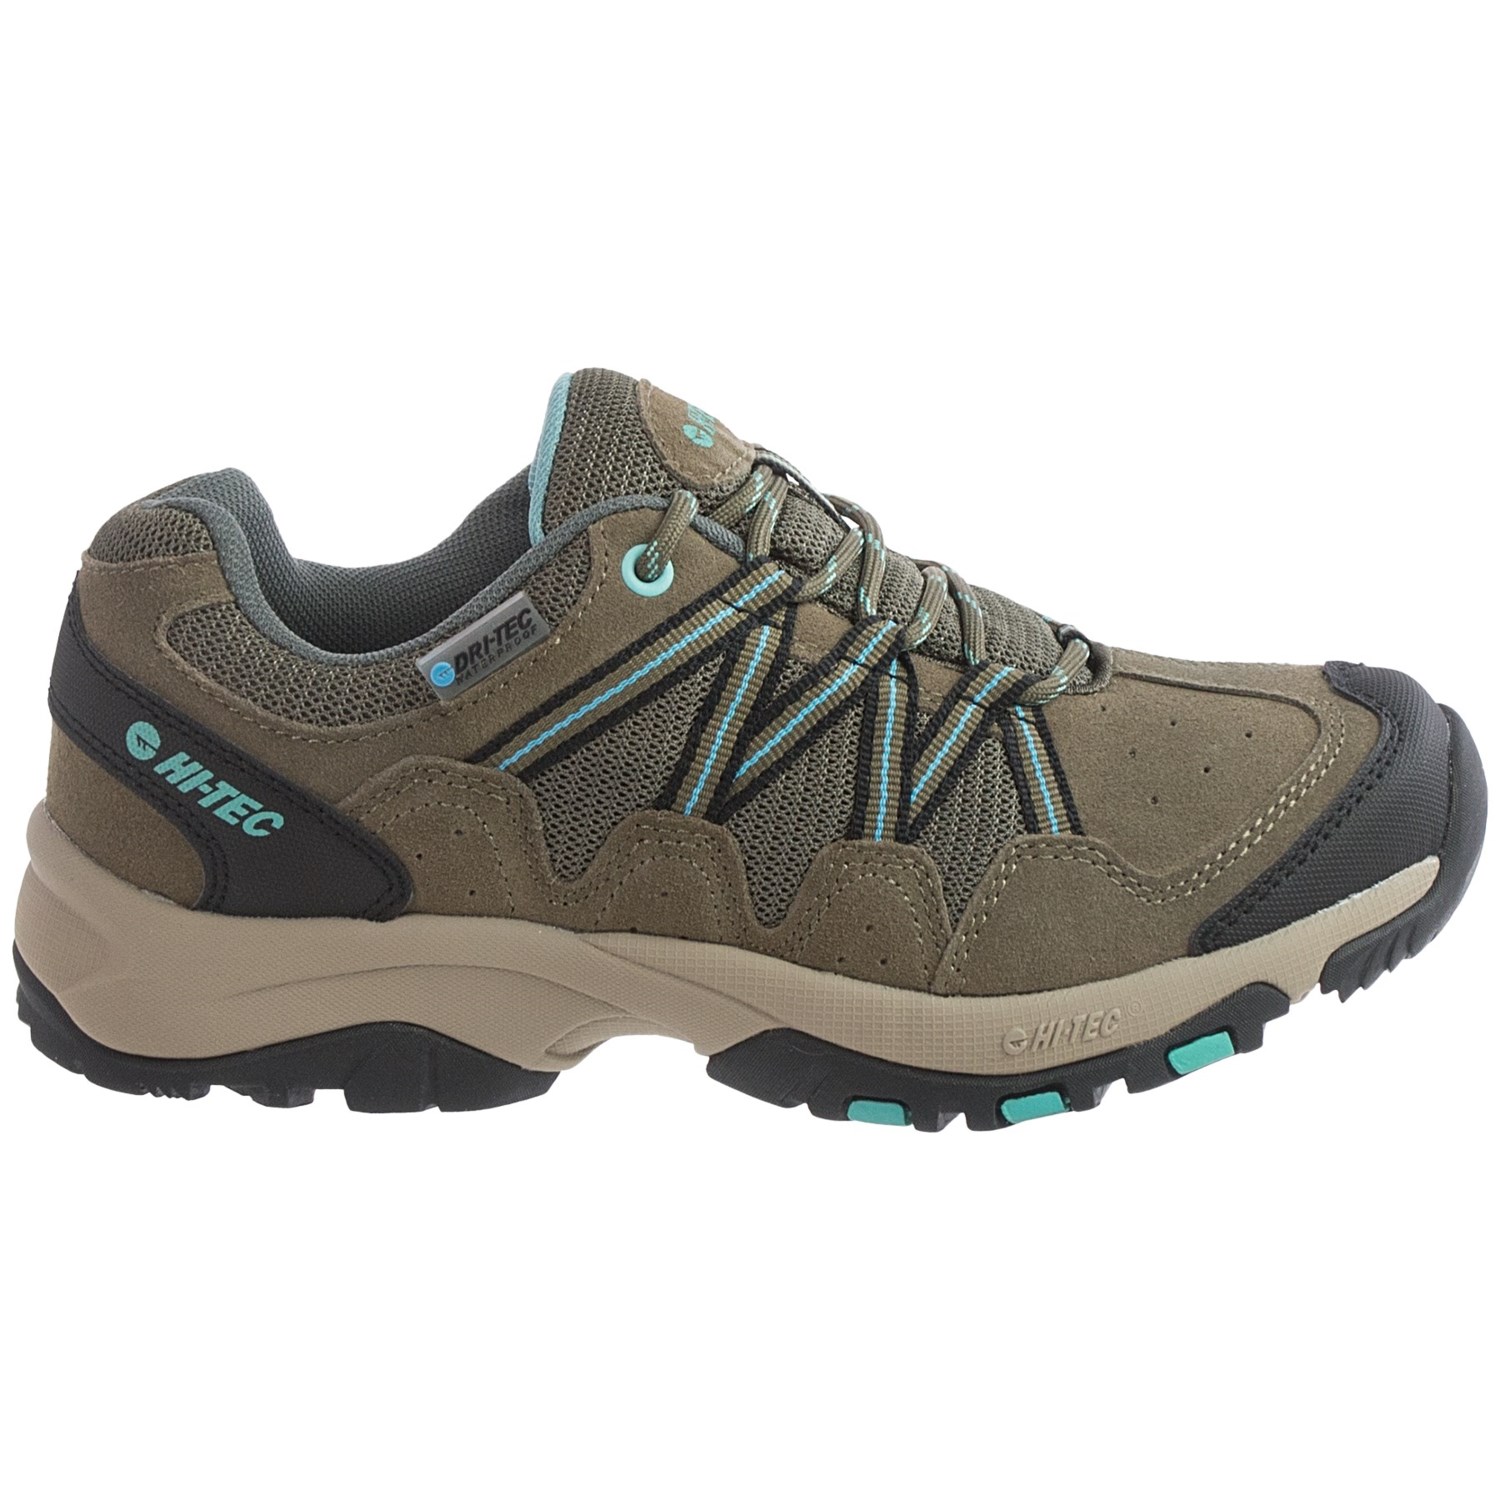 Hi-Tec Florence Low WP Hiking Shoes (For Women) - Save 42%